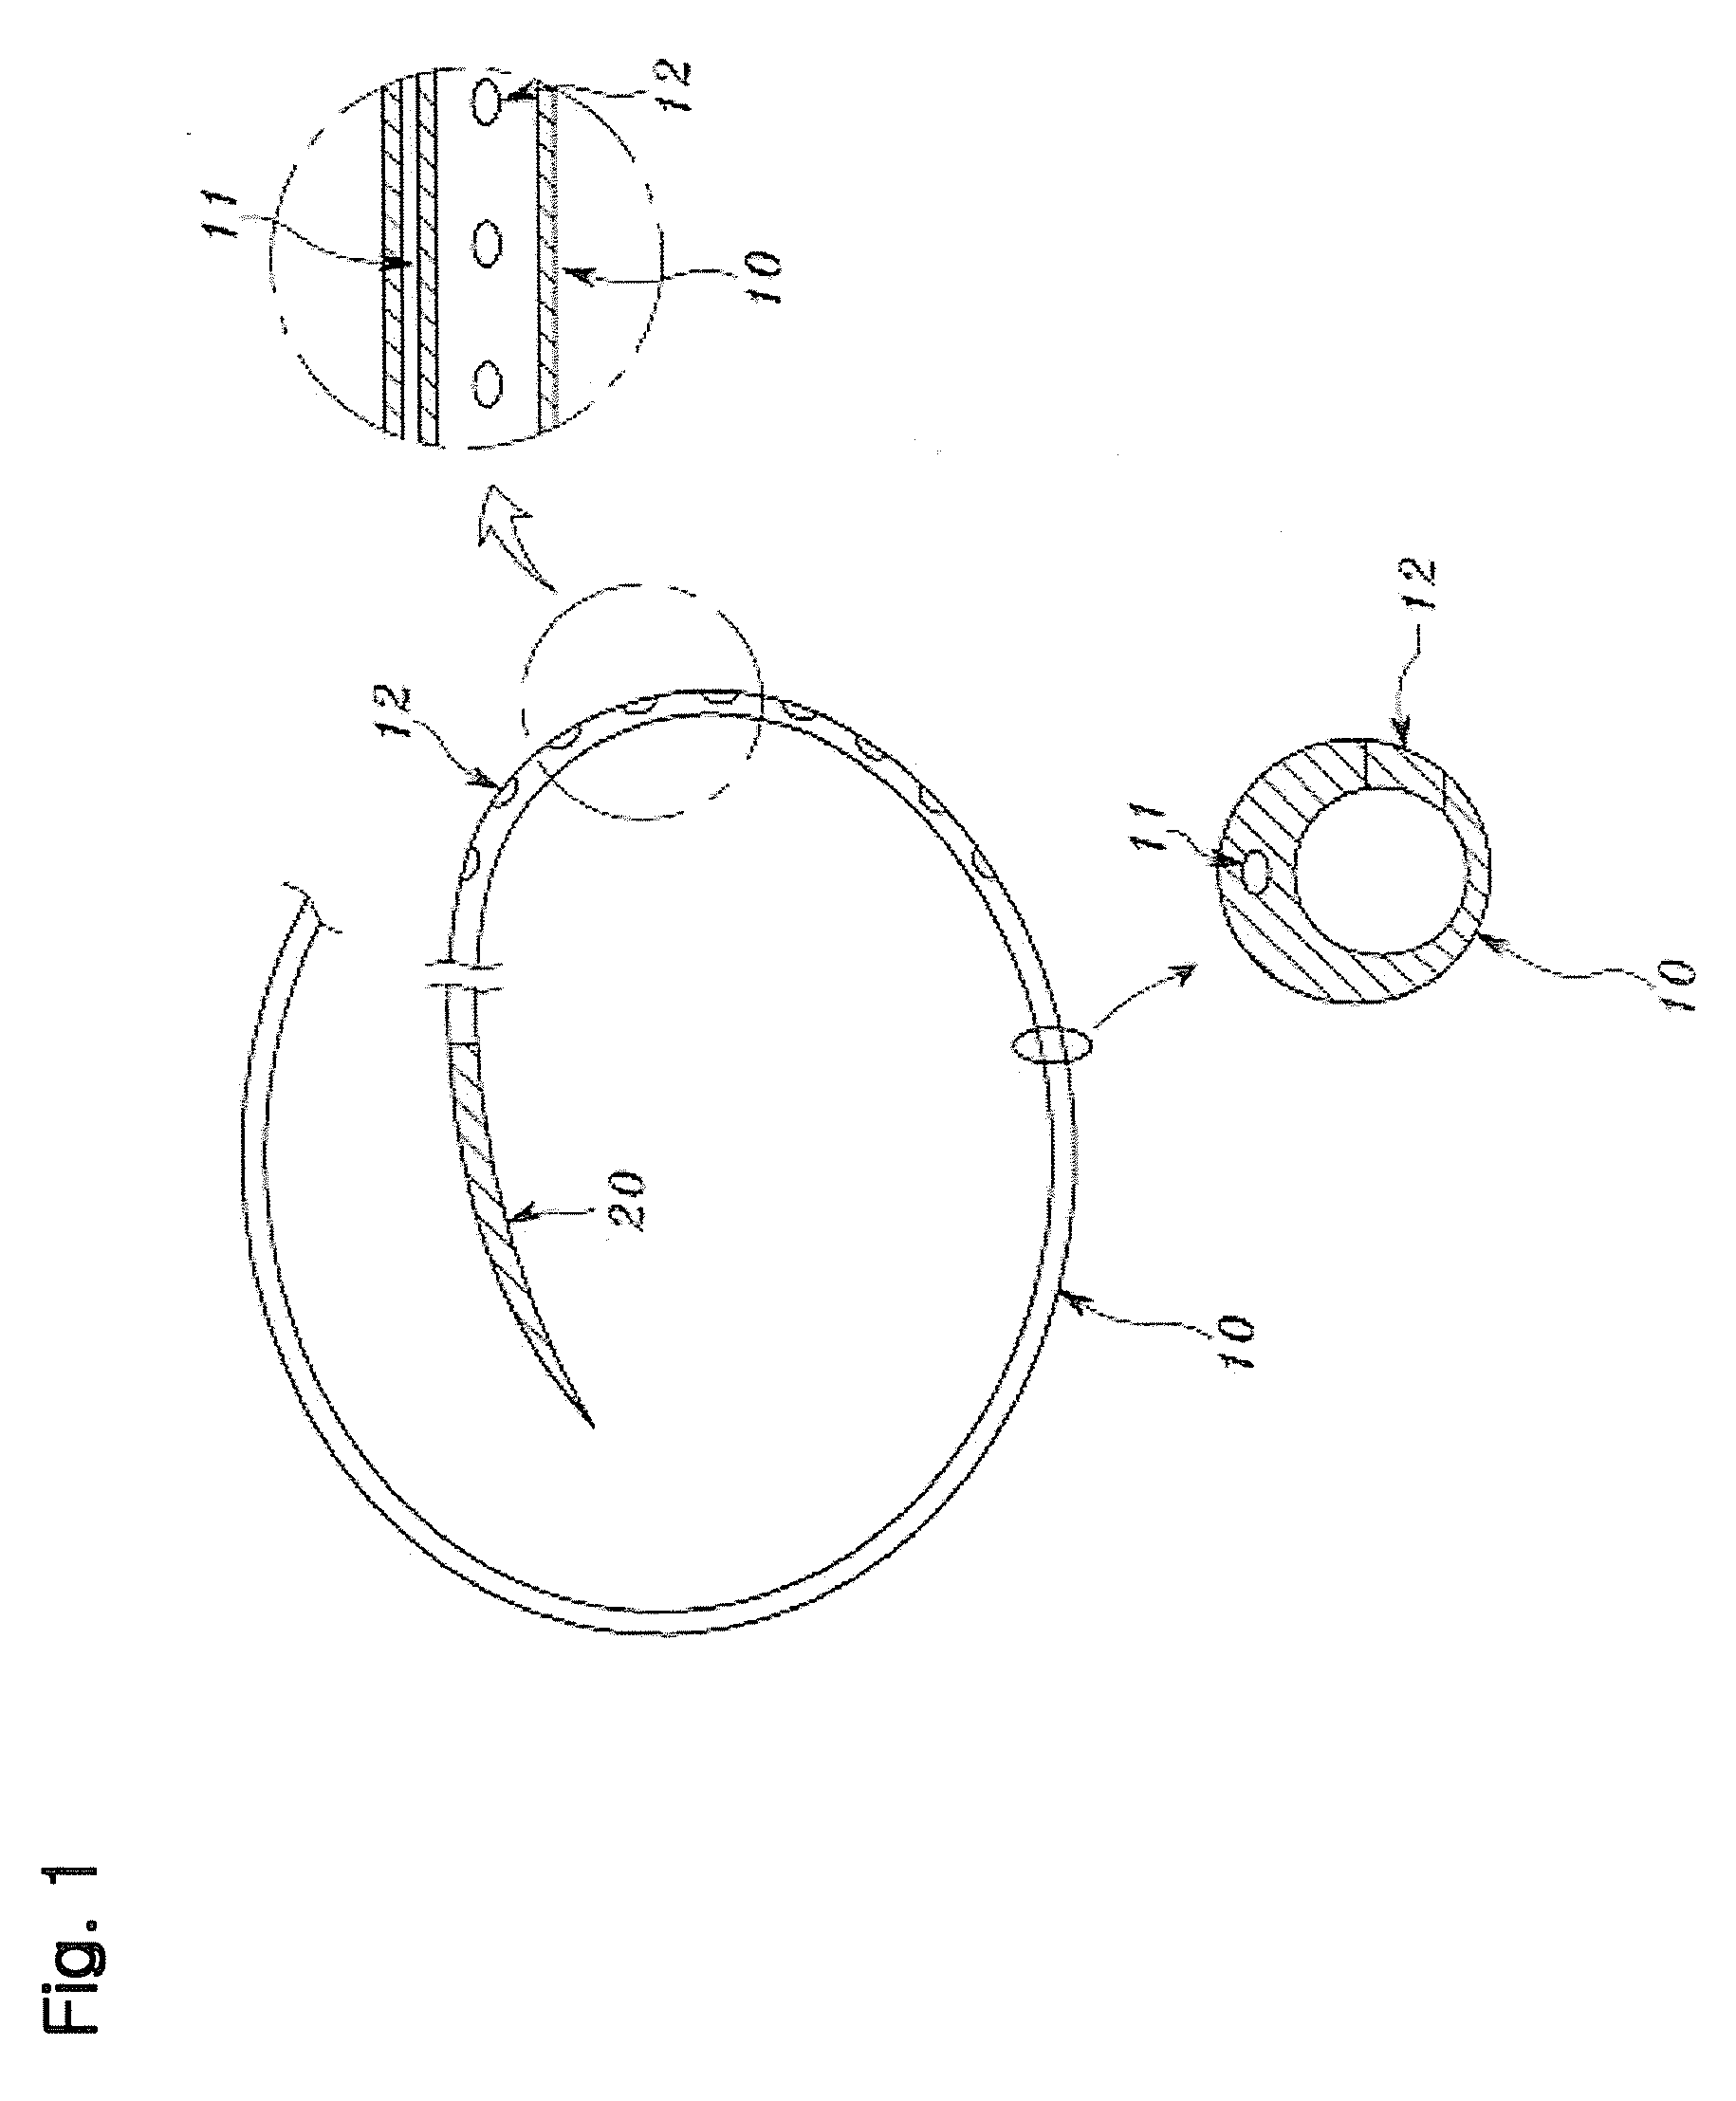 Closed Suction Drainage Apparatus With Drainage Tube Having Anti-Clogging and Irrigating Functions